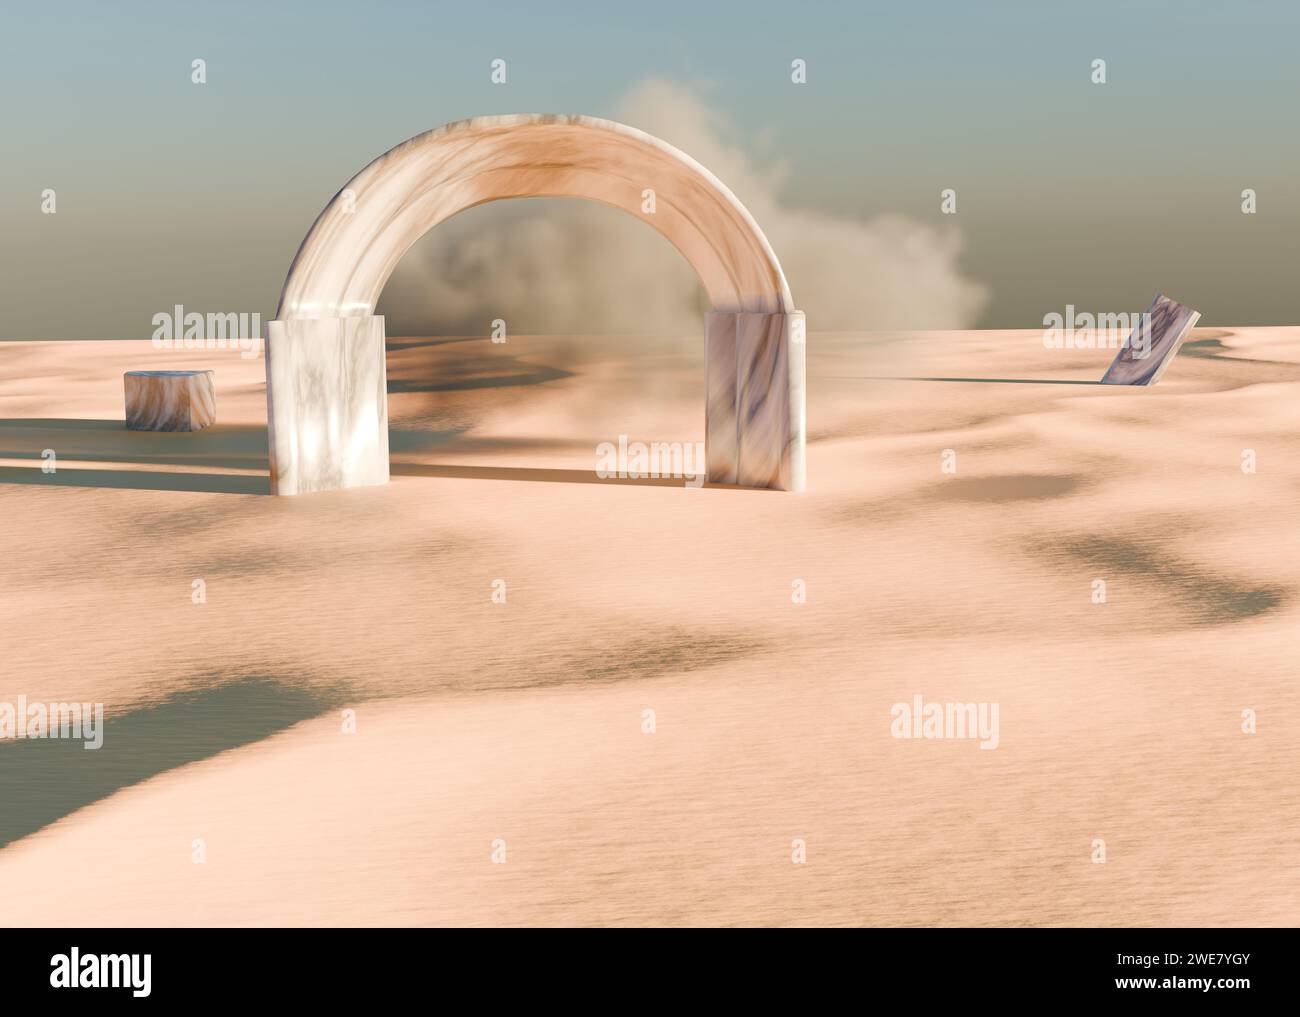 Abstract sandy desert dunes and marble arch landscape, 3D Illustration. Stock Photo